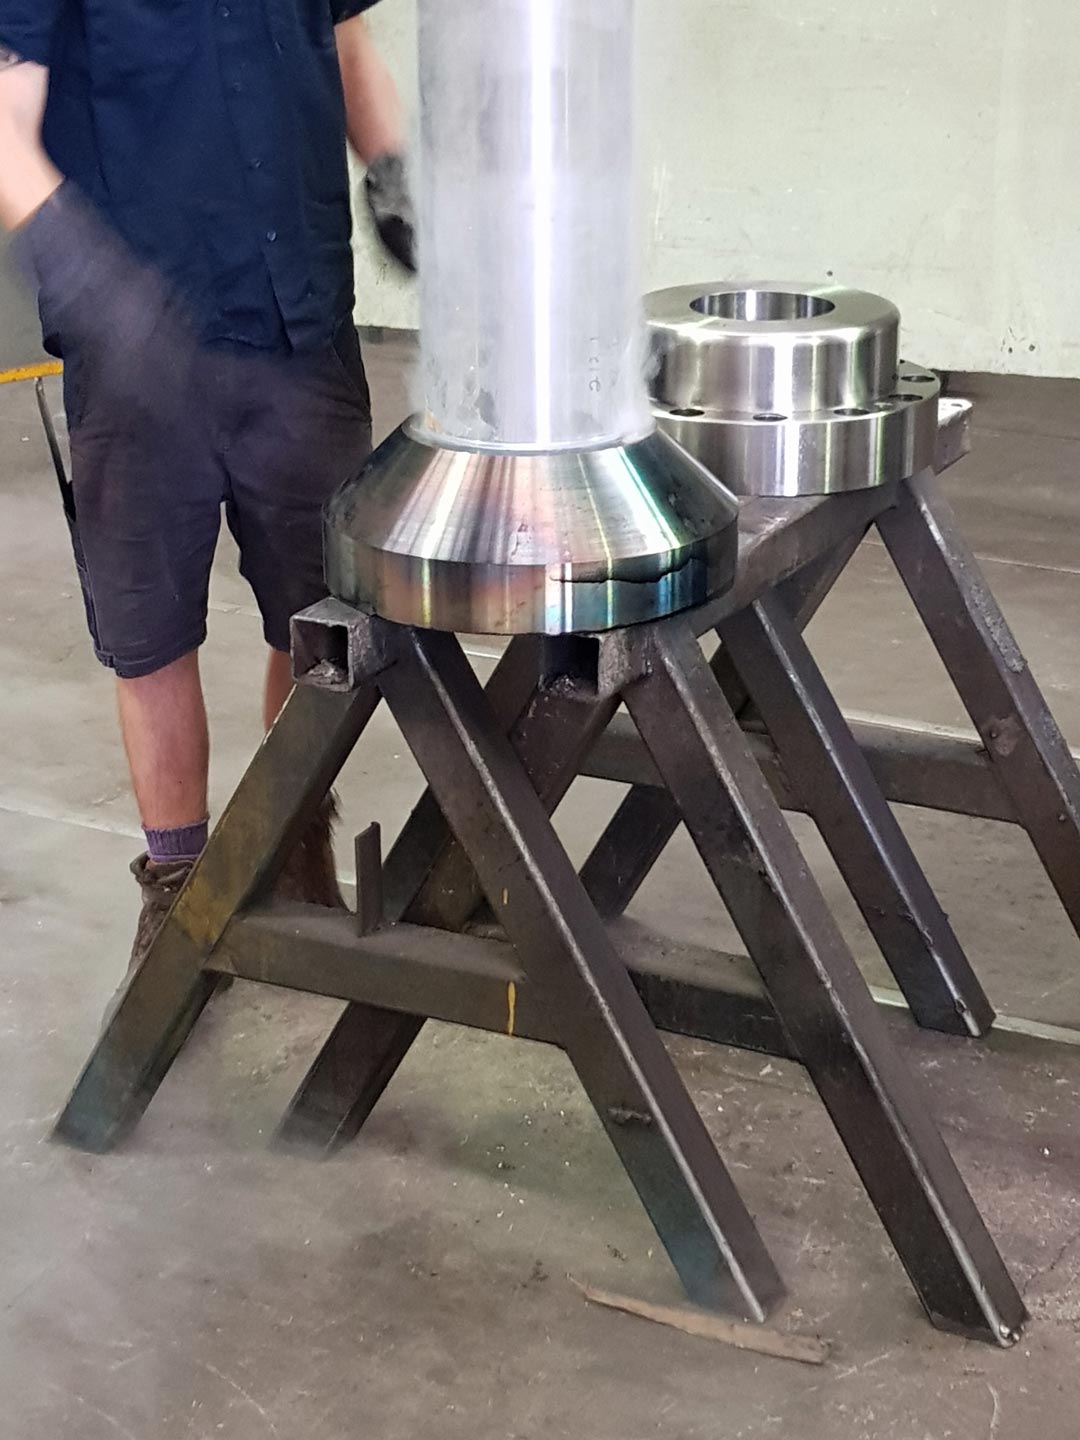 heated metal flange being pressed onto cold shaft